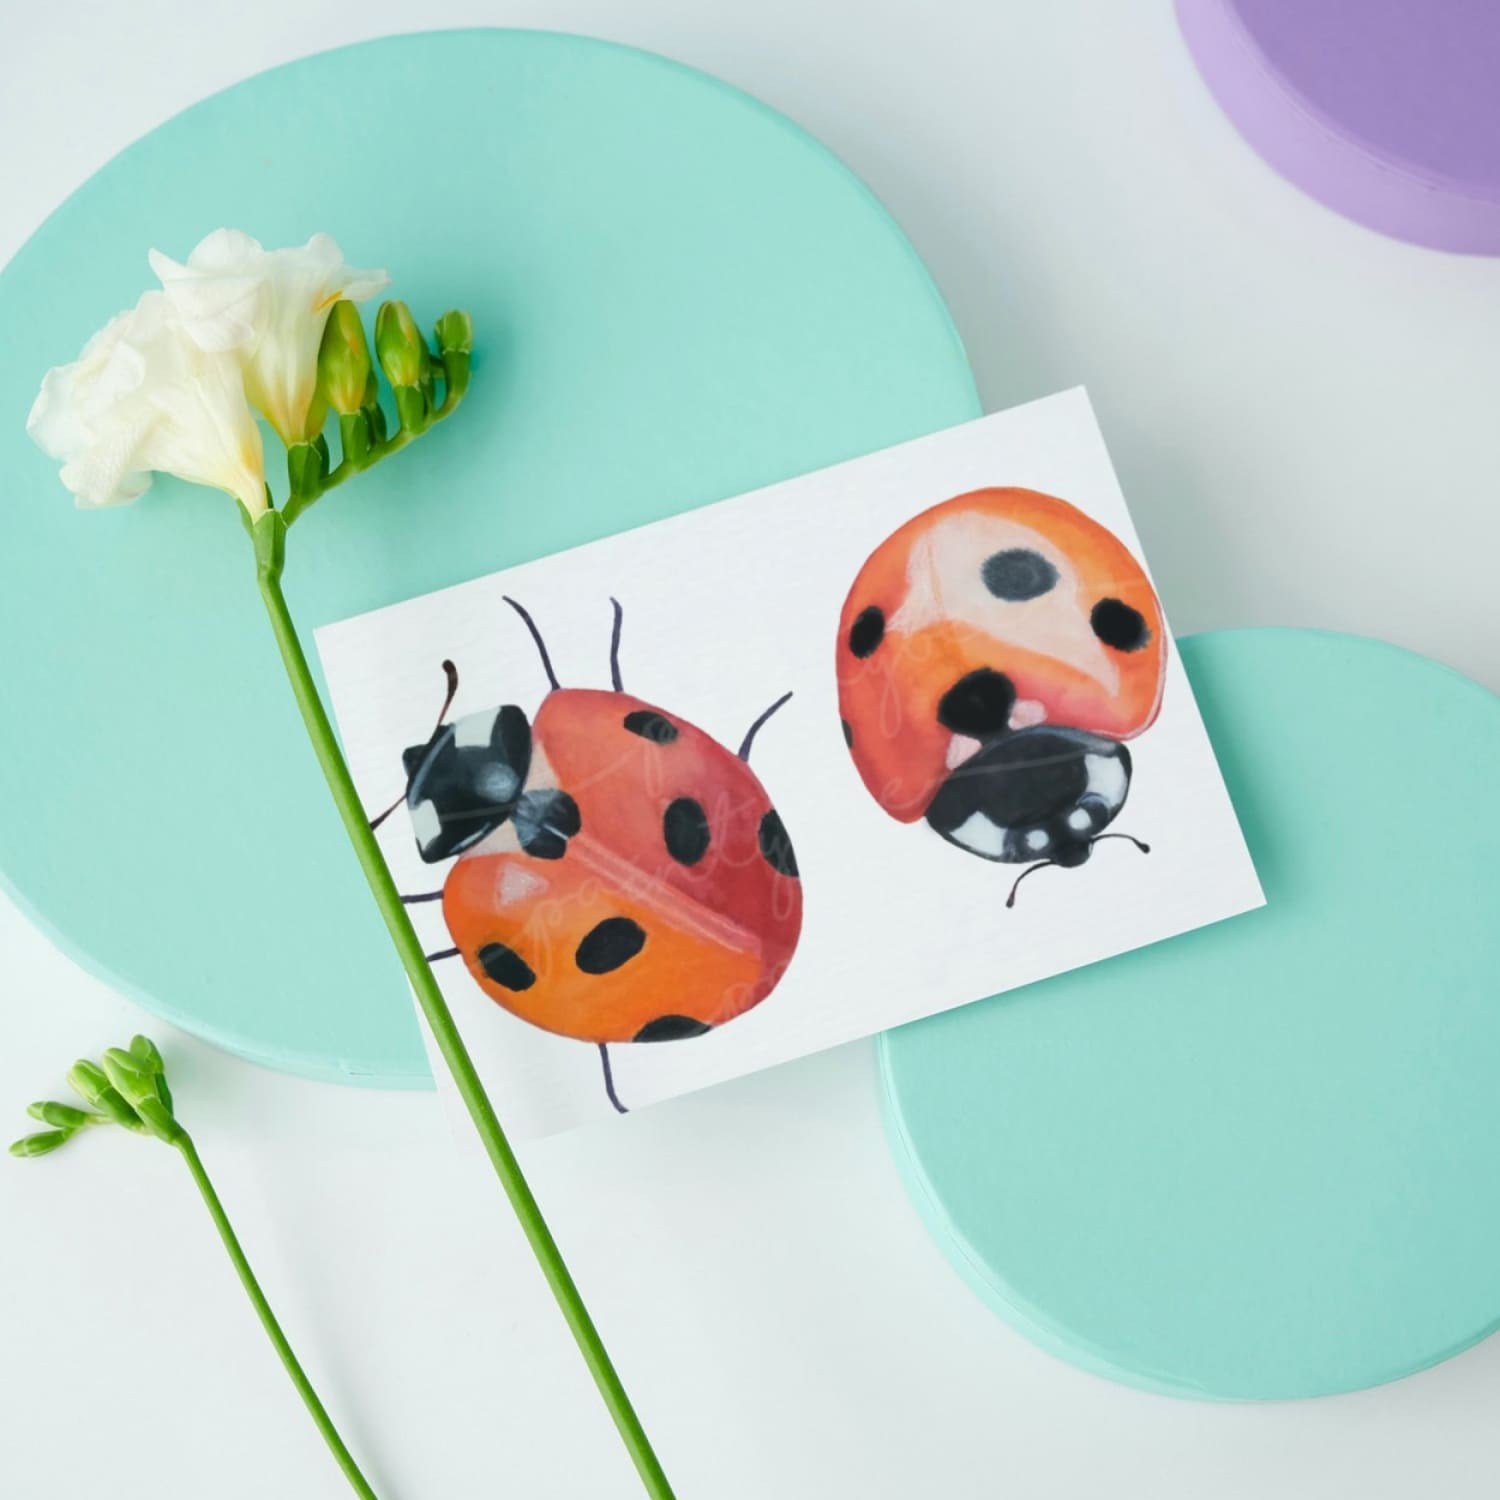 Ladybug watercolor clipart Created By Paintybees-Watercolor Clip Art Graphics.